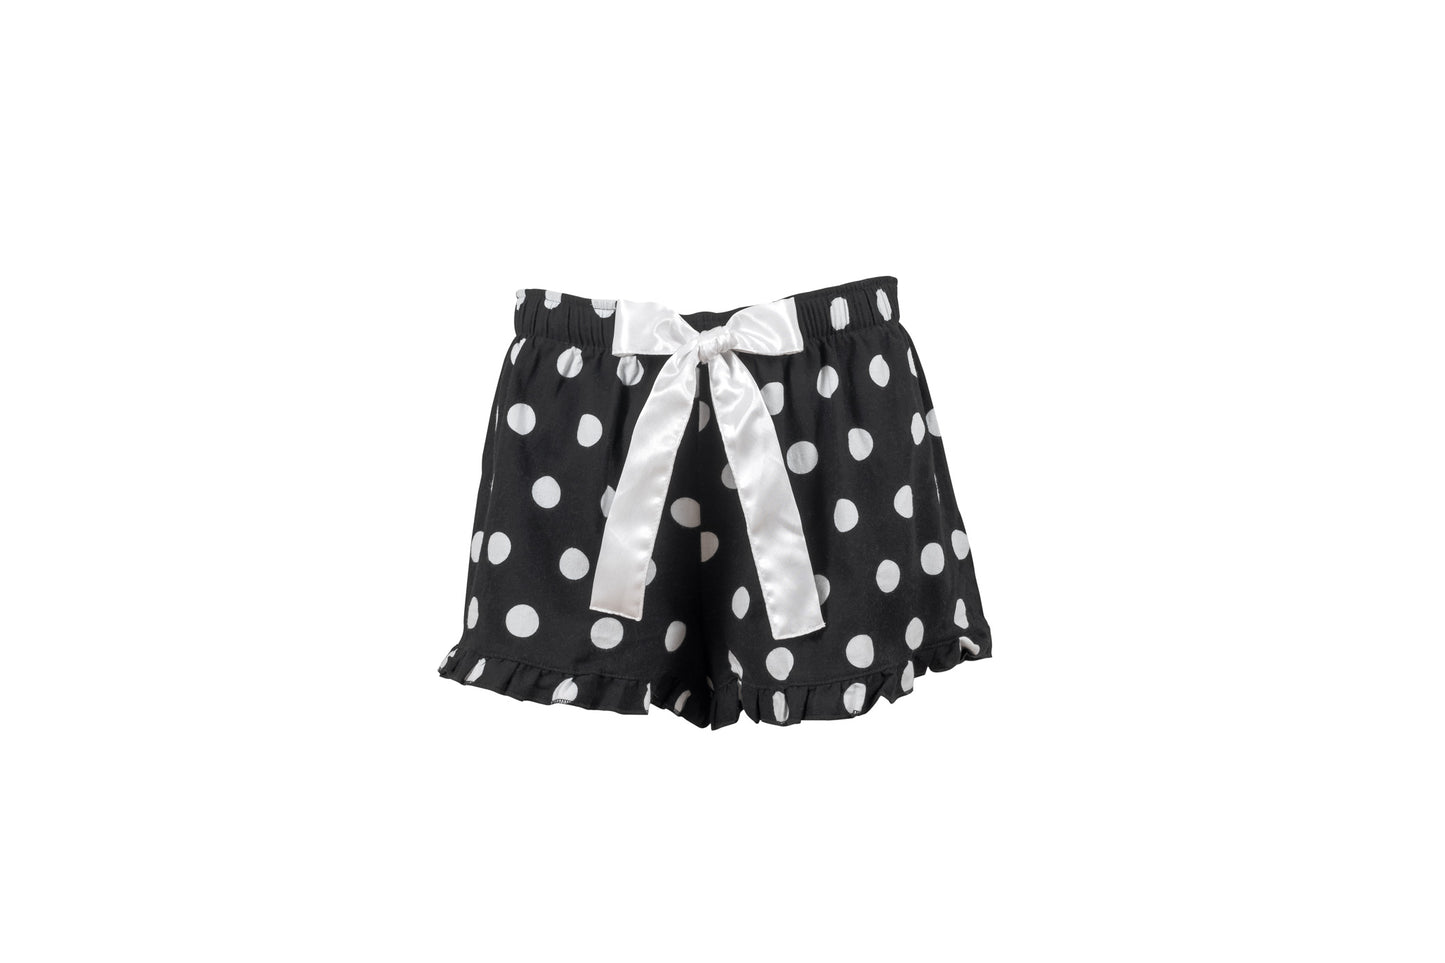 Flannel black and white polka dot shorts with a white satin bow